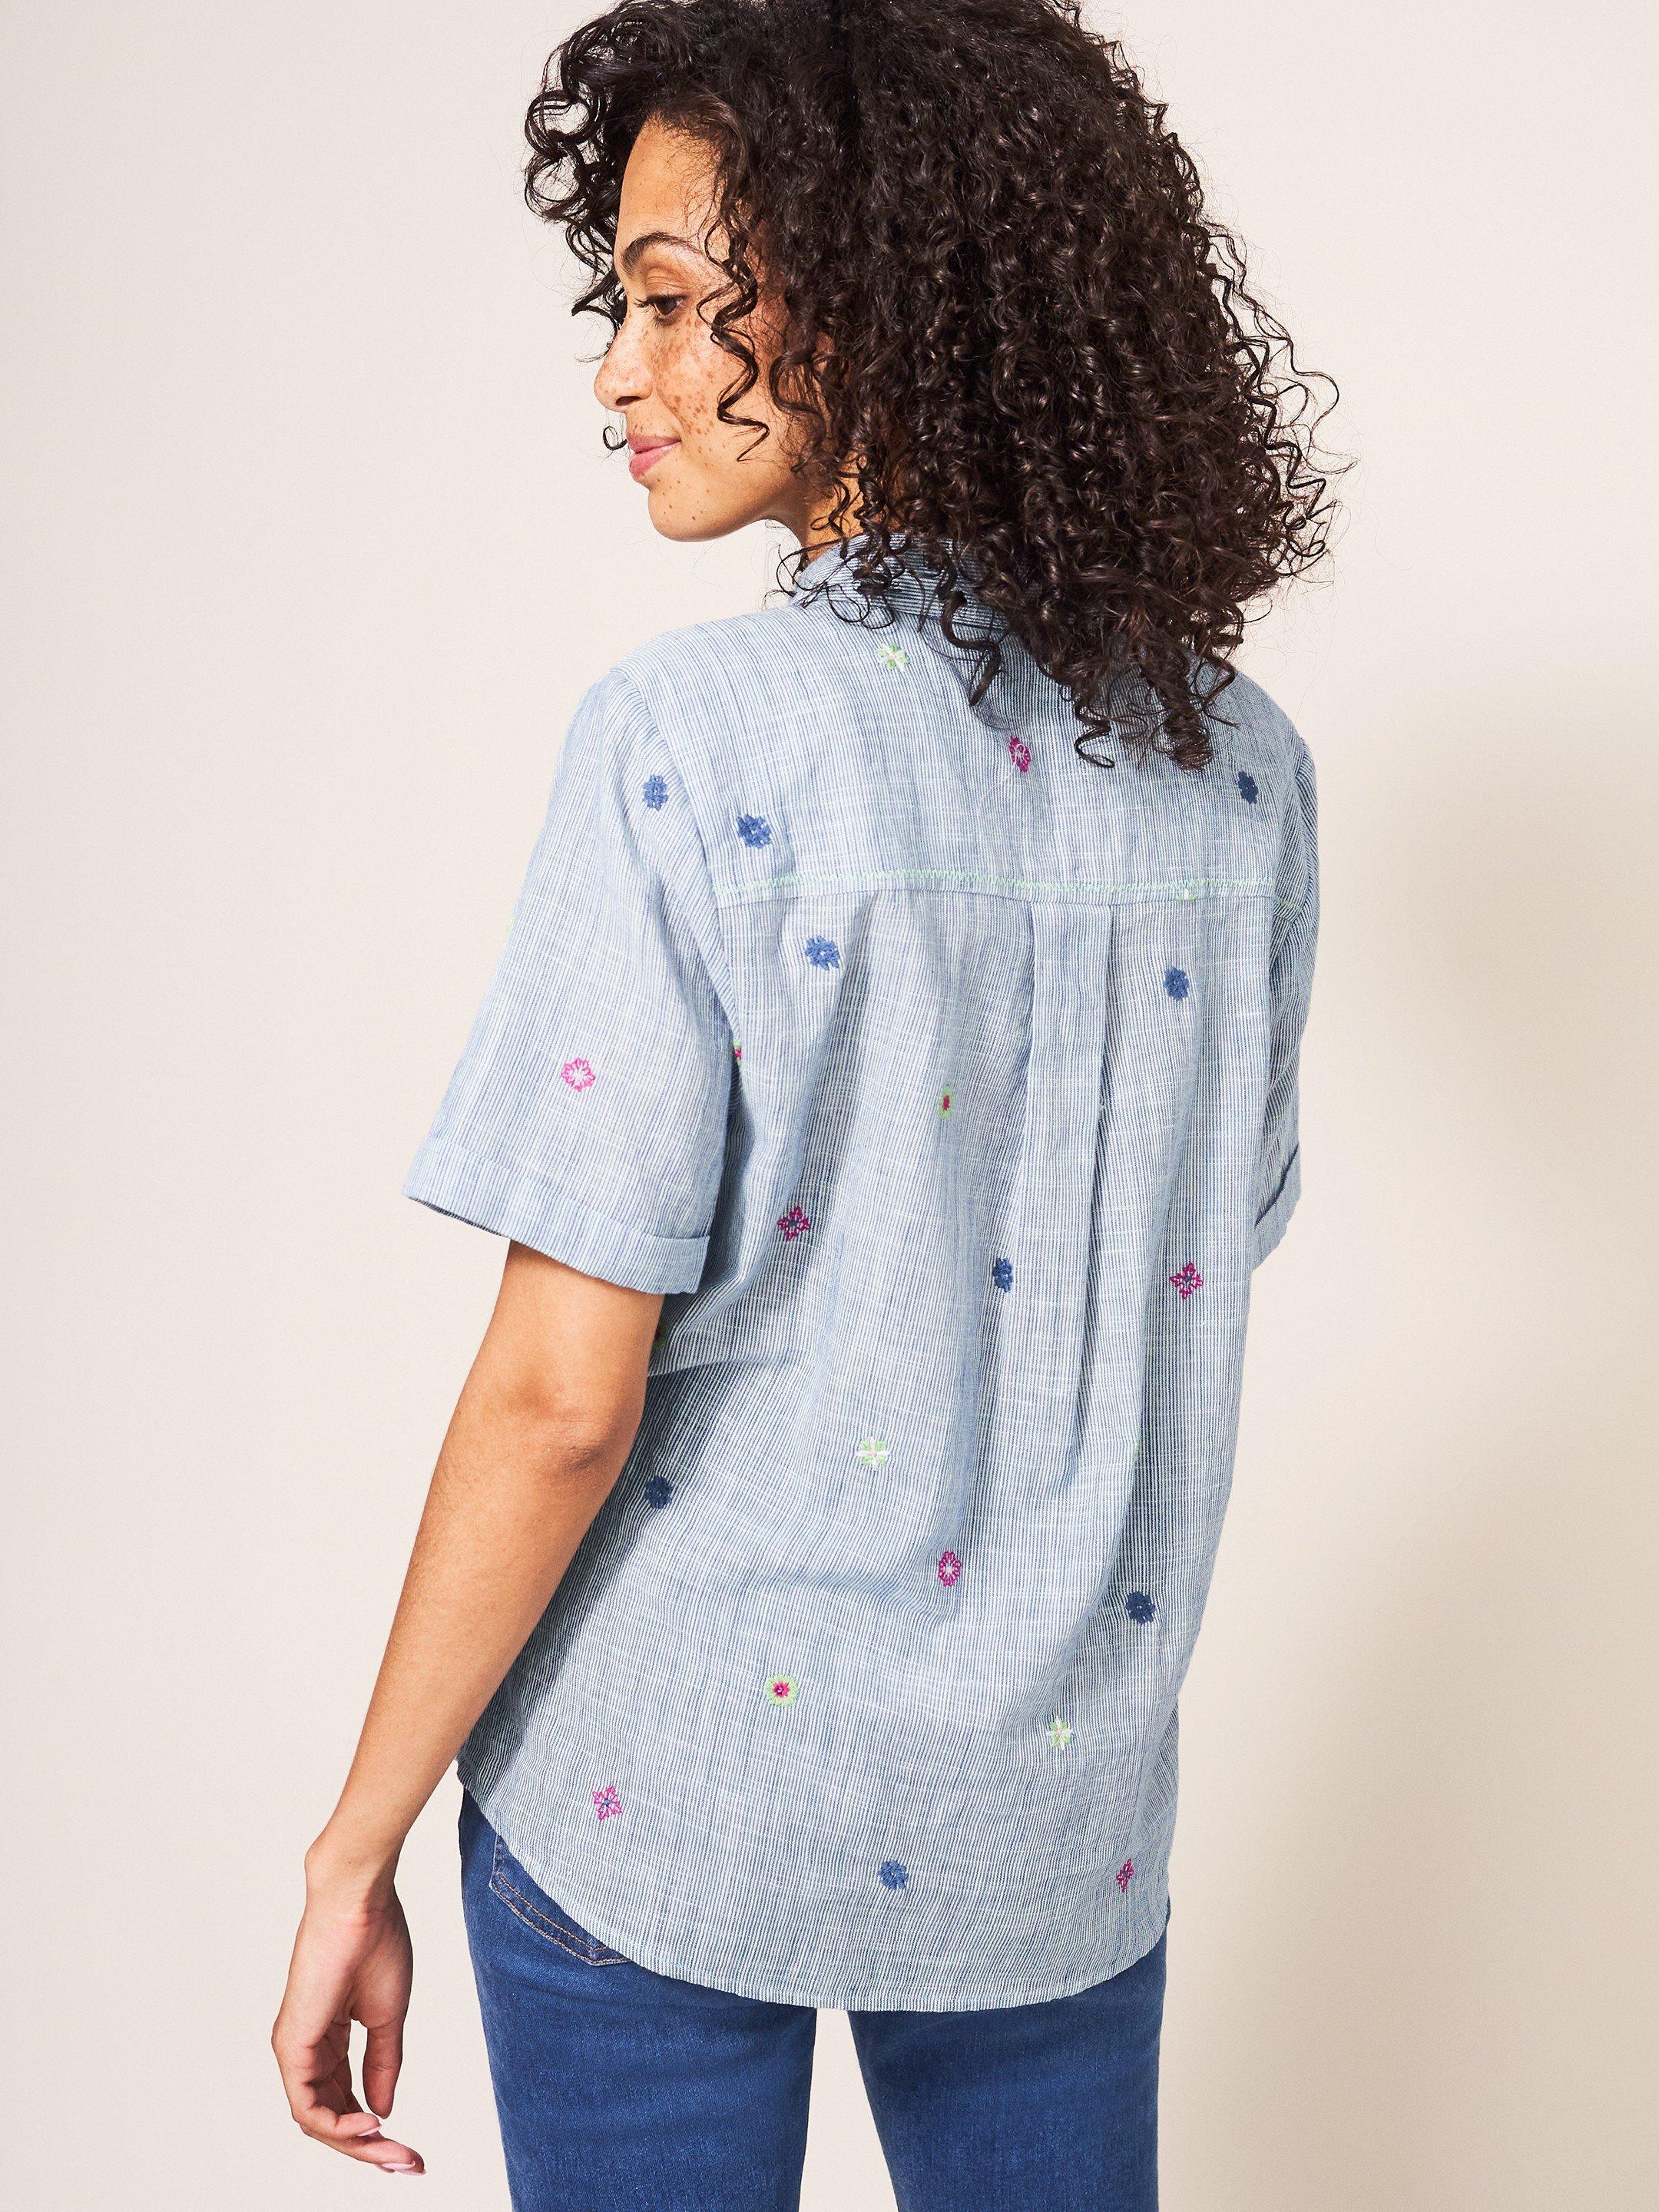 Geo Embroidered Shirt in BLUE MLT - MODEL BACK